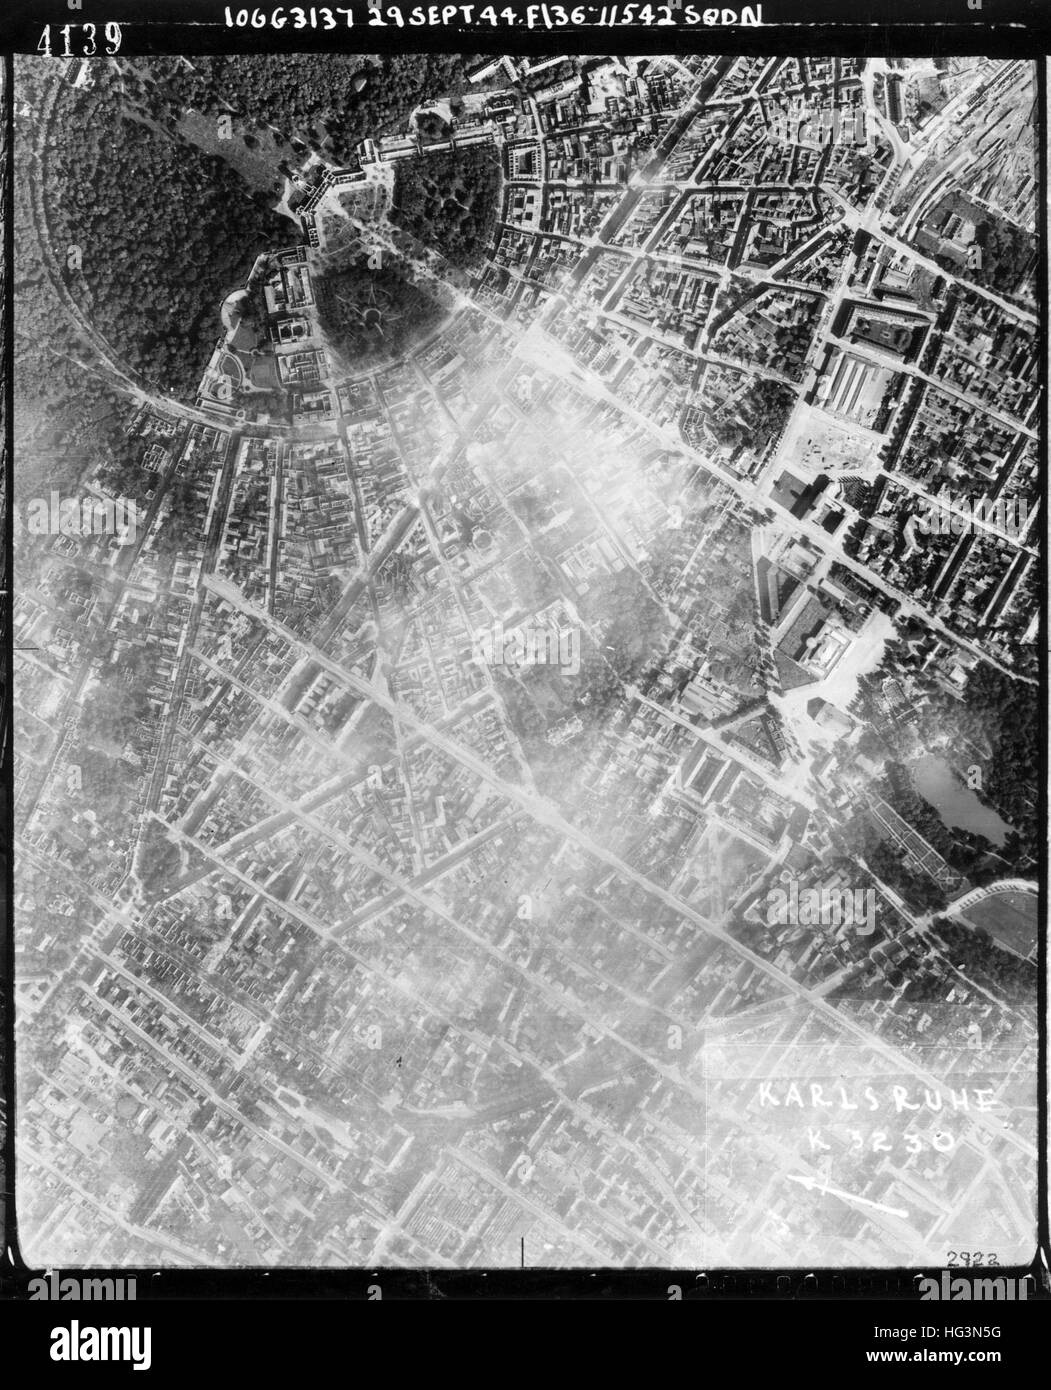 KARLSRUHE, Germany. Reconnaissance photo taken on 29 September from a Spitfire of 542 Squadron RAF showing bomb damage in the central area after the RAF bombing raid on 26 September 1944. Thin cloud obscuring part of the image. Stock Photo